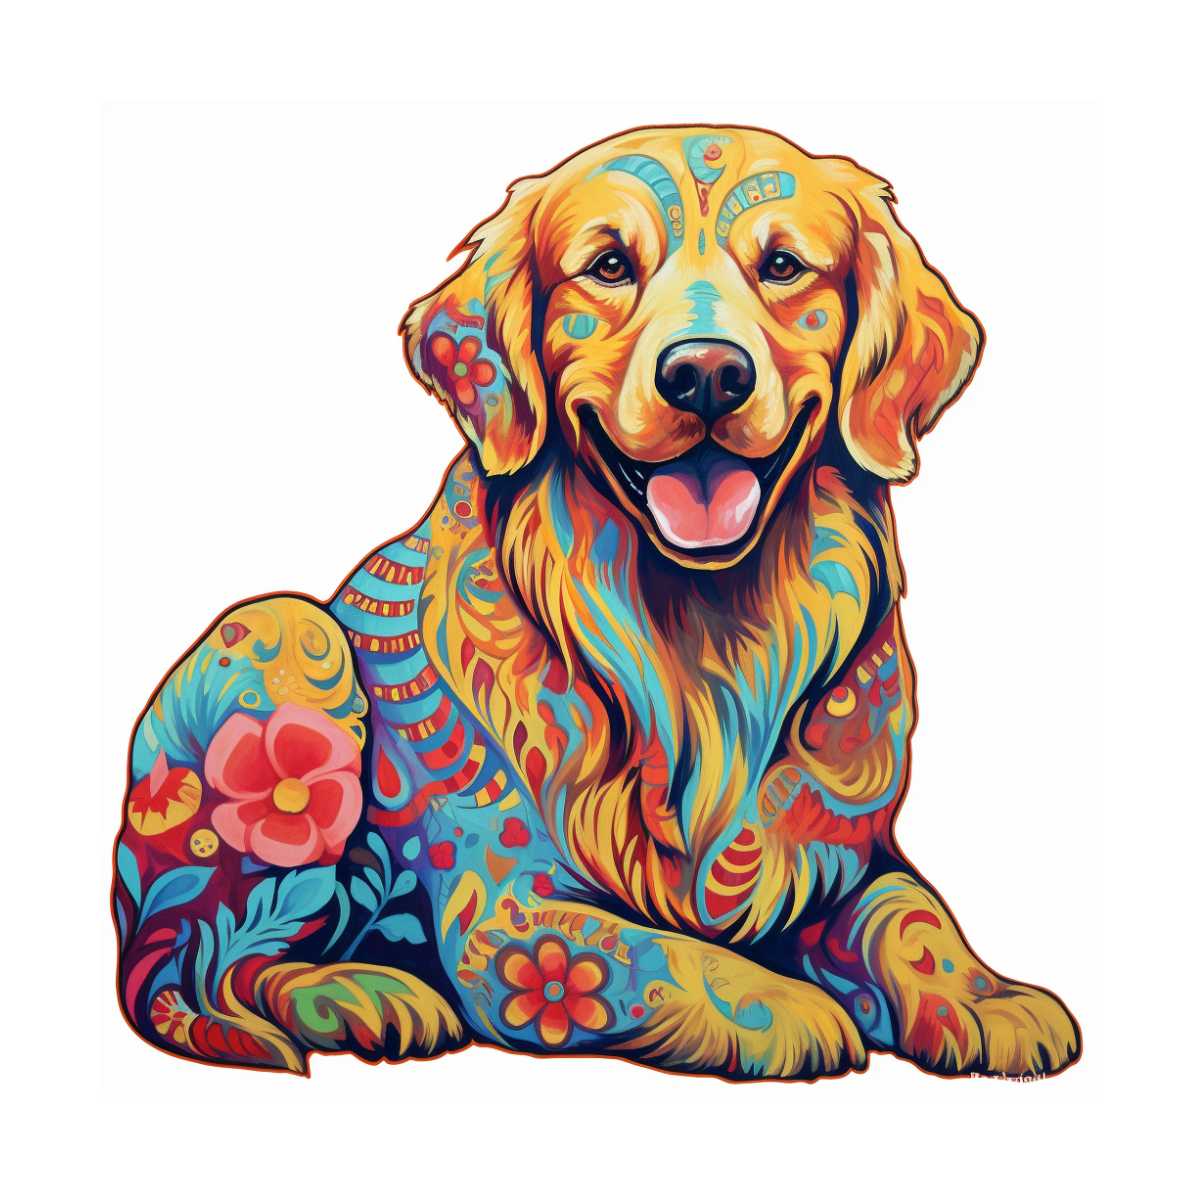 Animal Jigsaw Puzzle > Wooden Jigsaw Puzzle > Jigsaw Puzzle A5 Golden Retriever Dog - Jigsaw Puzzle